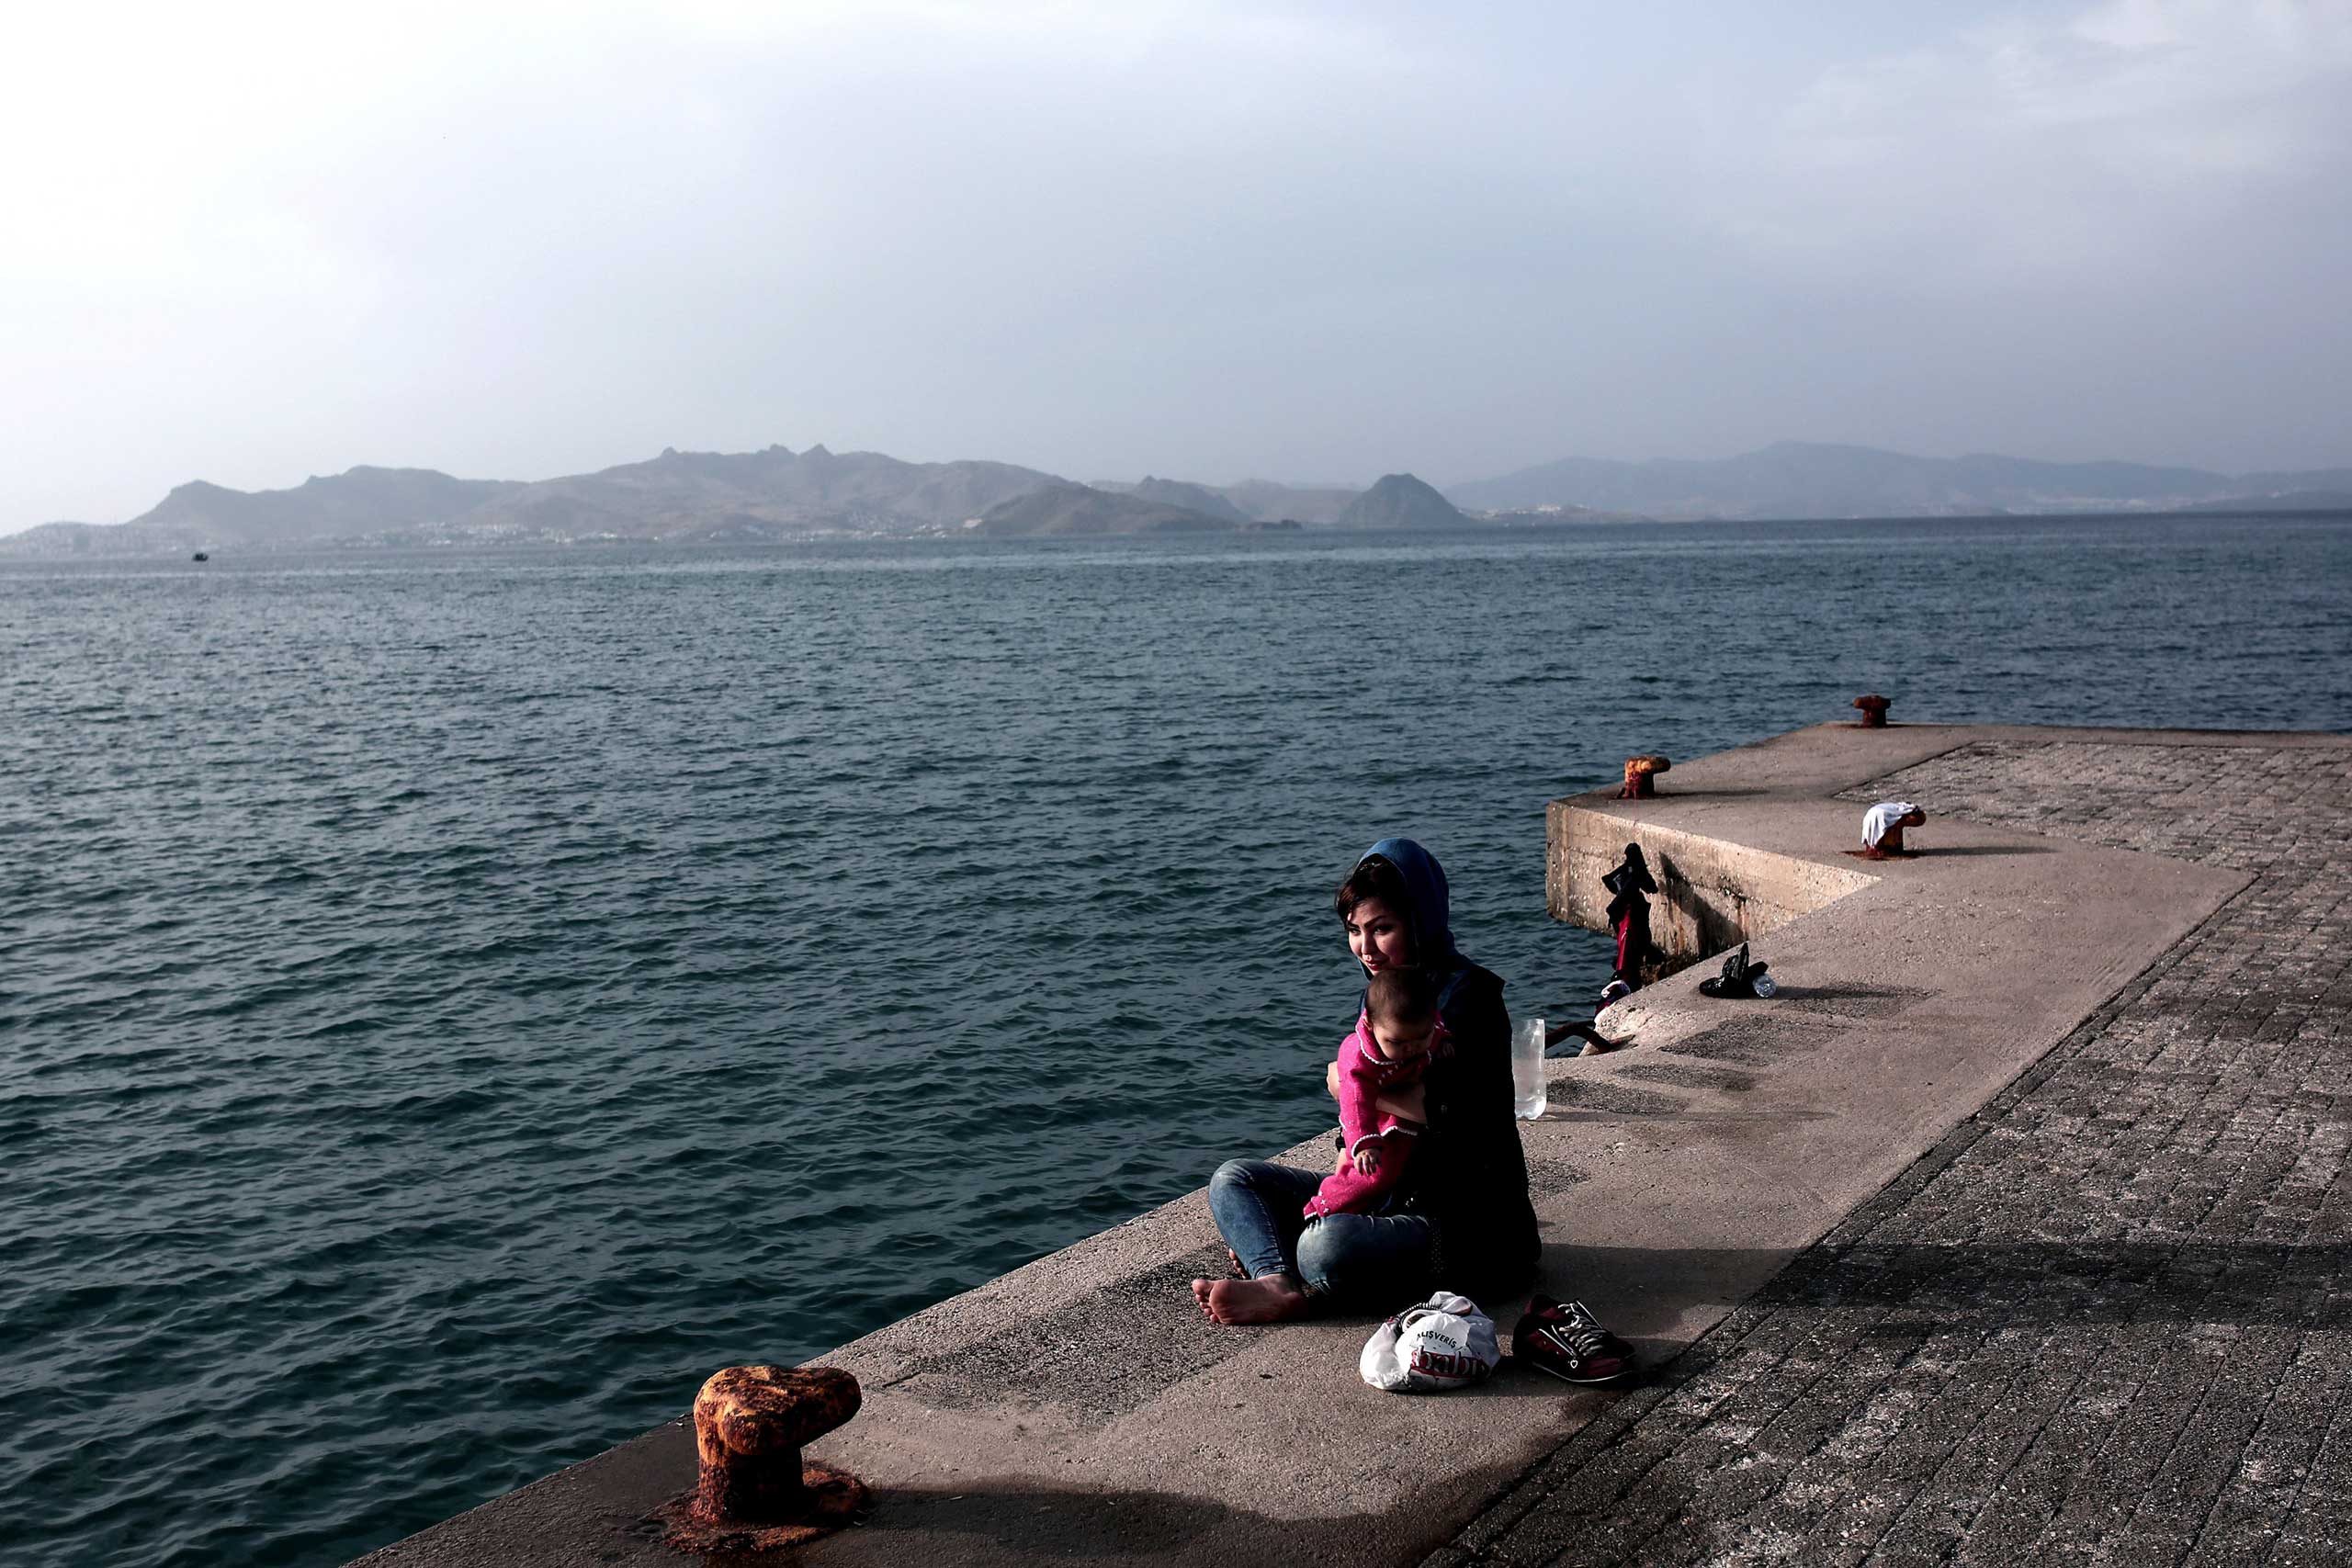 An Afghan woman sits with her child at a dock at the port of the Greek island of Kos on May 27, 2015.